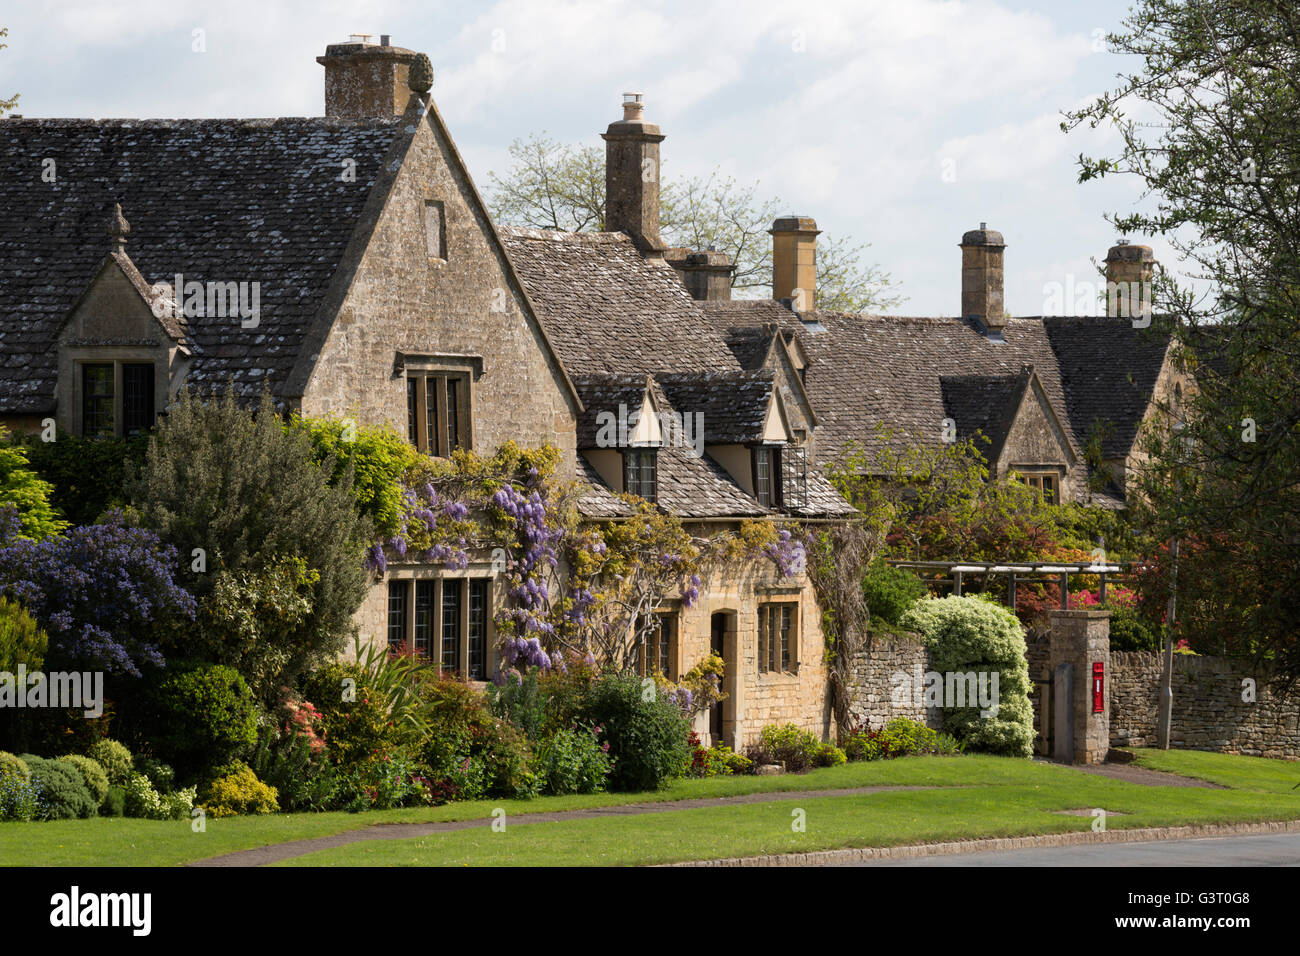 Cotswold cottage in pietra, Chipping Campden, Cotswolds, Gloucestershire, England, Regno Unito, Europa Foto Stock